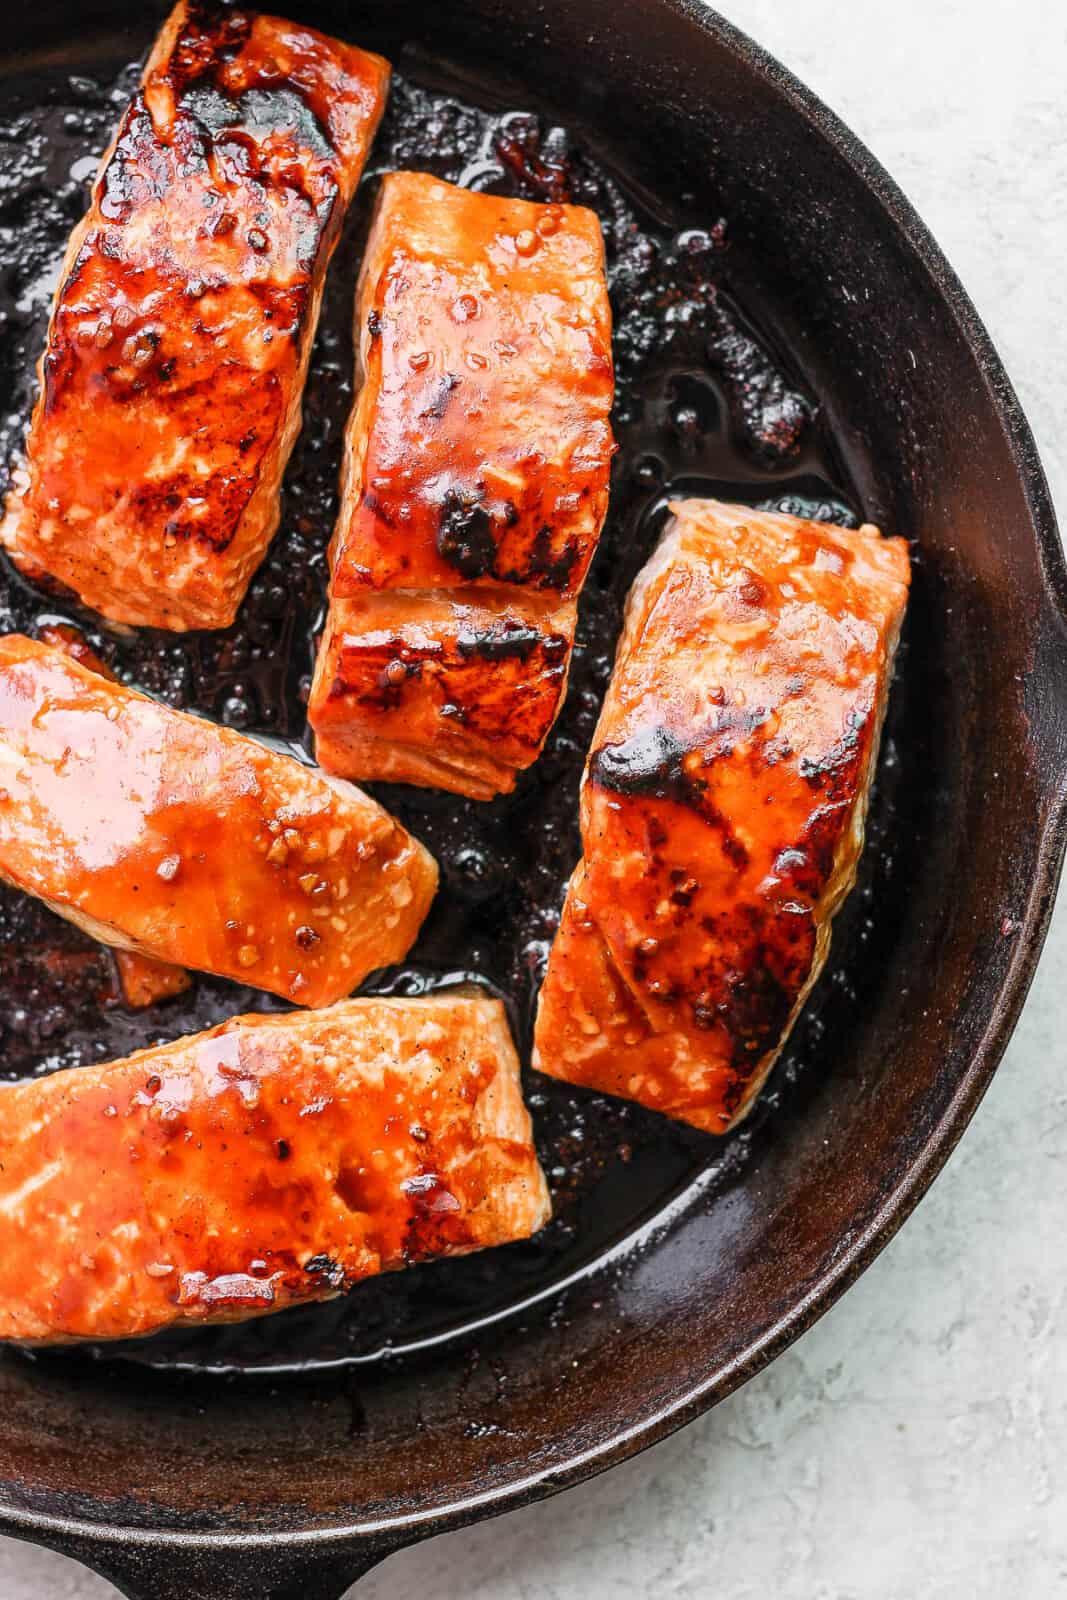 Salmon fillets in a cast iron skillet with more teriyaki sauce on top.